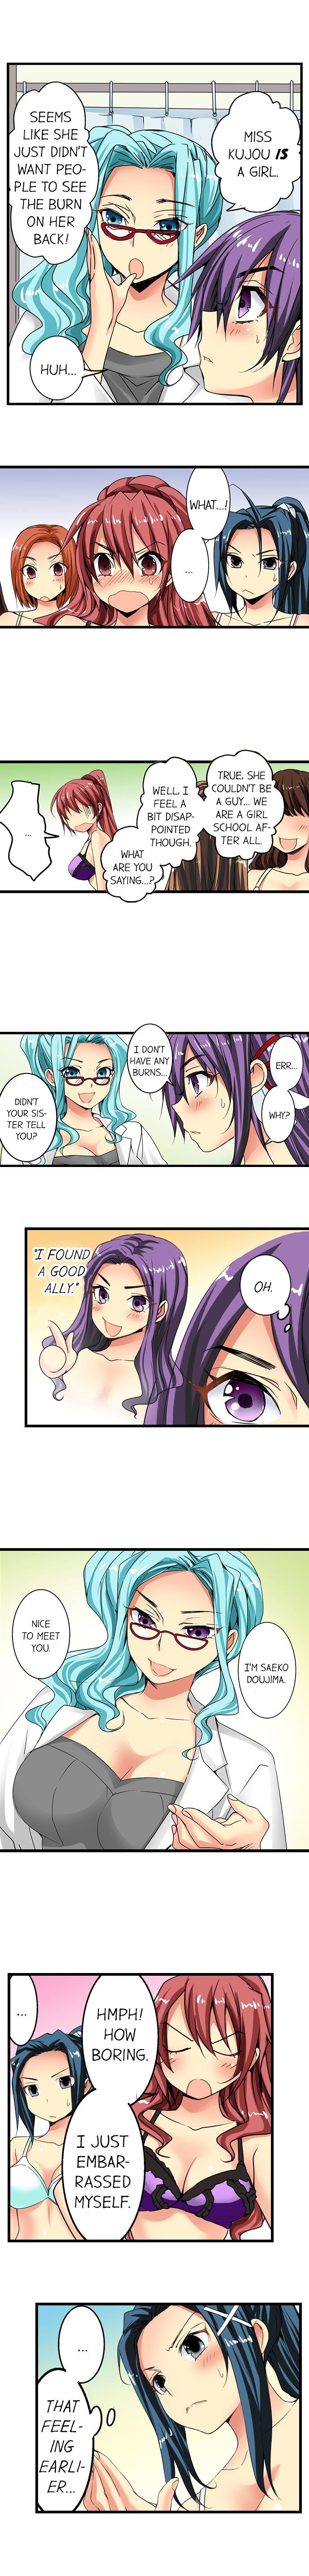 Sneaked Into A Horny Girls’ School - Chapter 11 Page 2